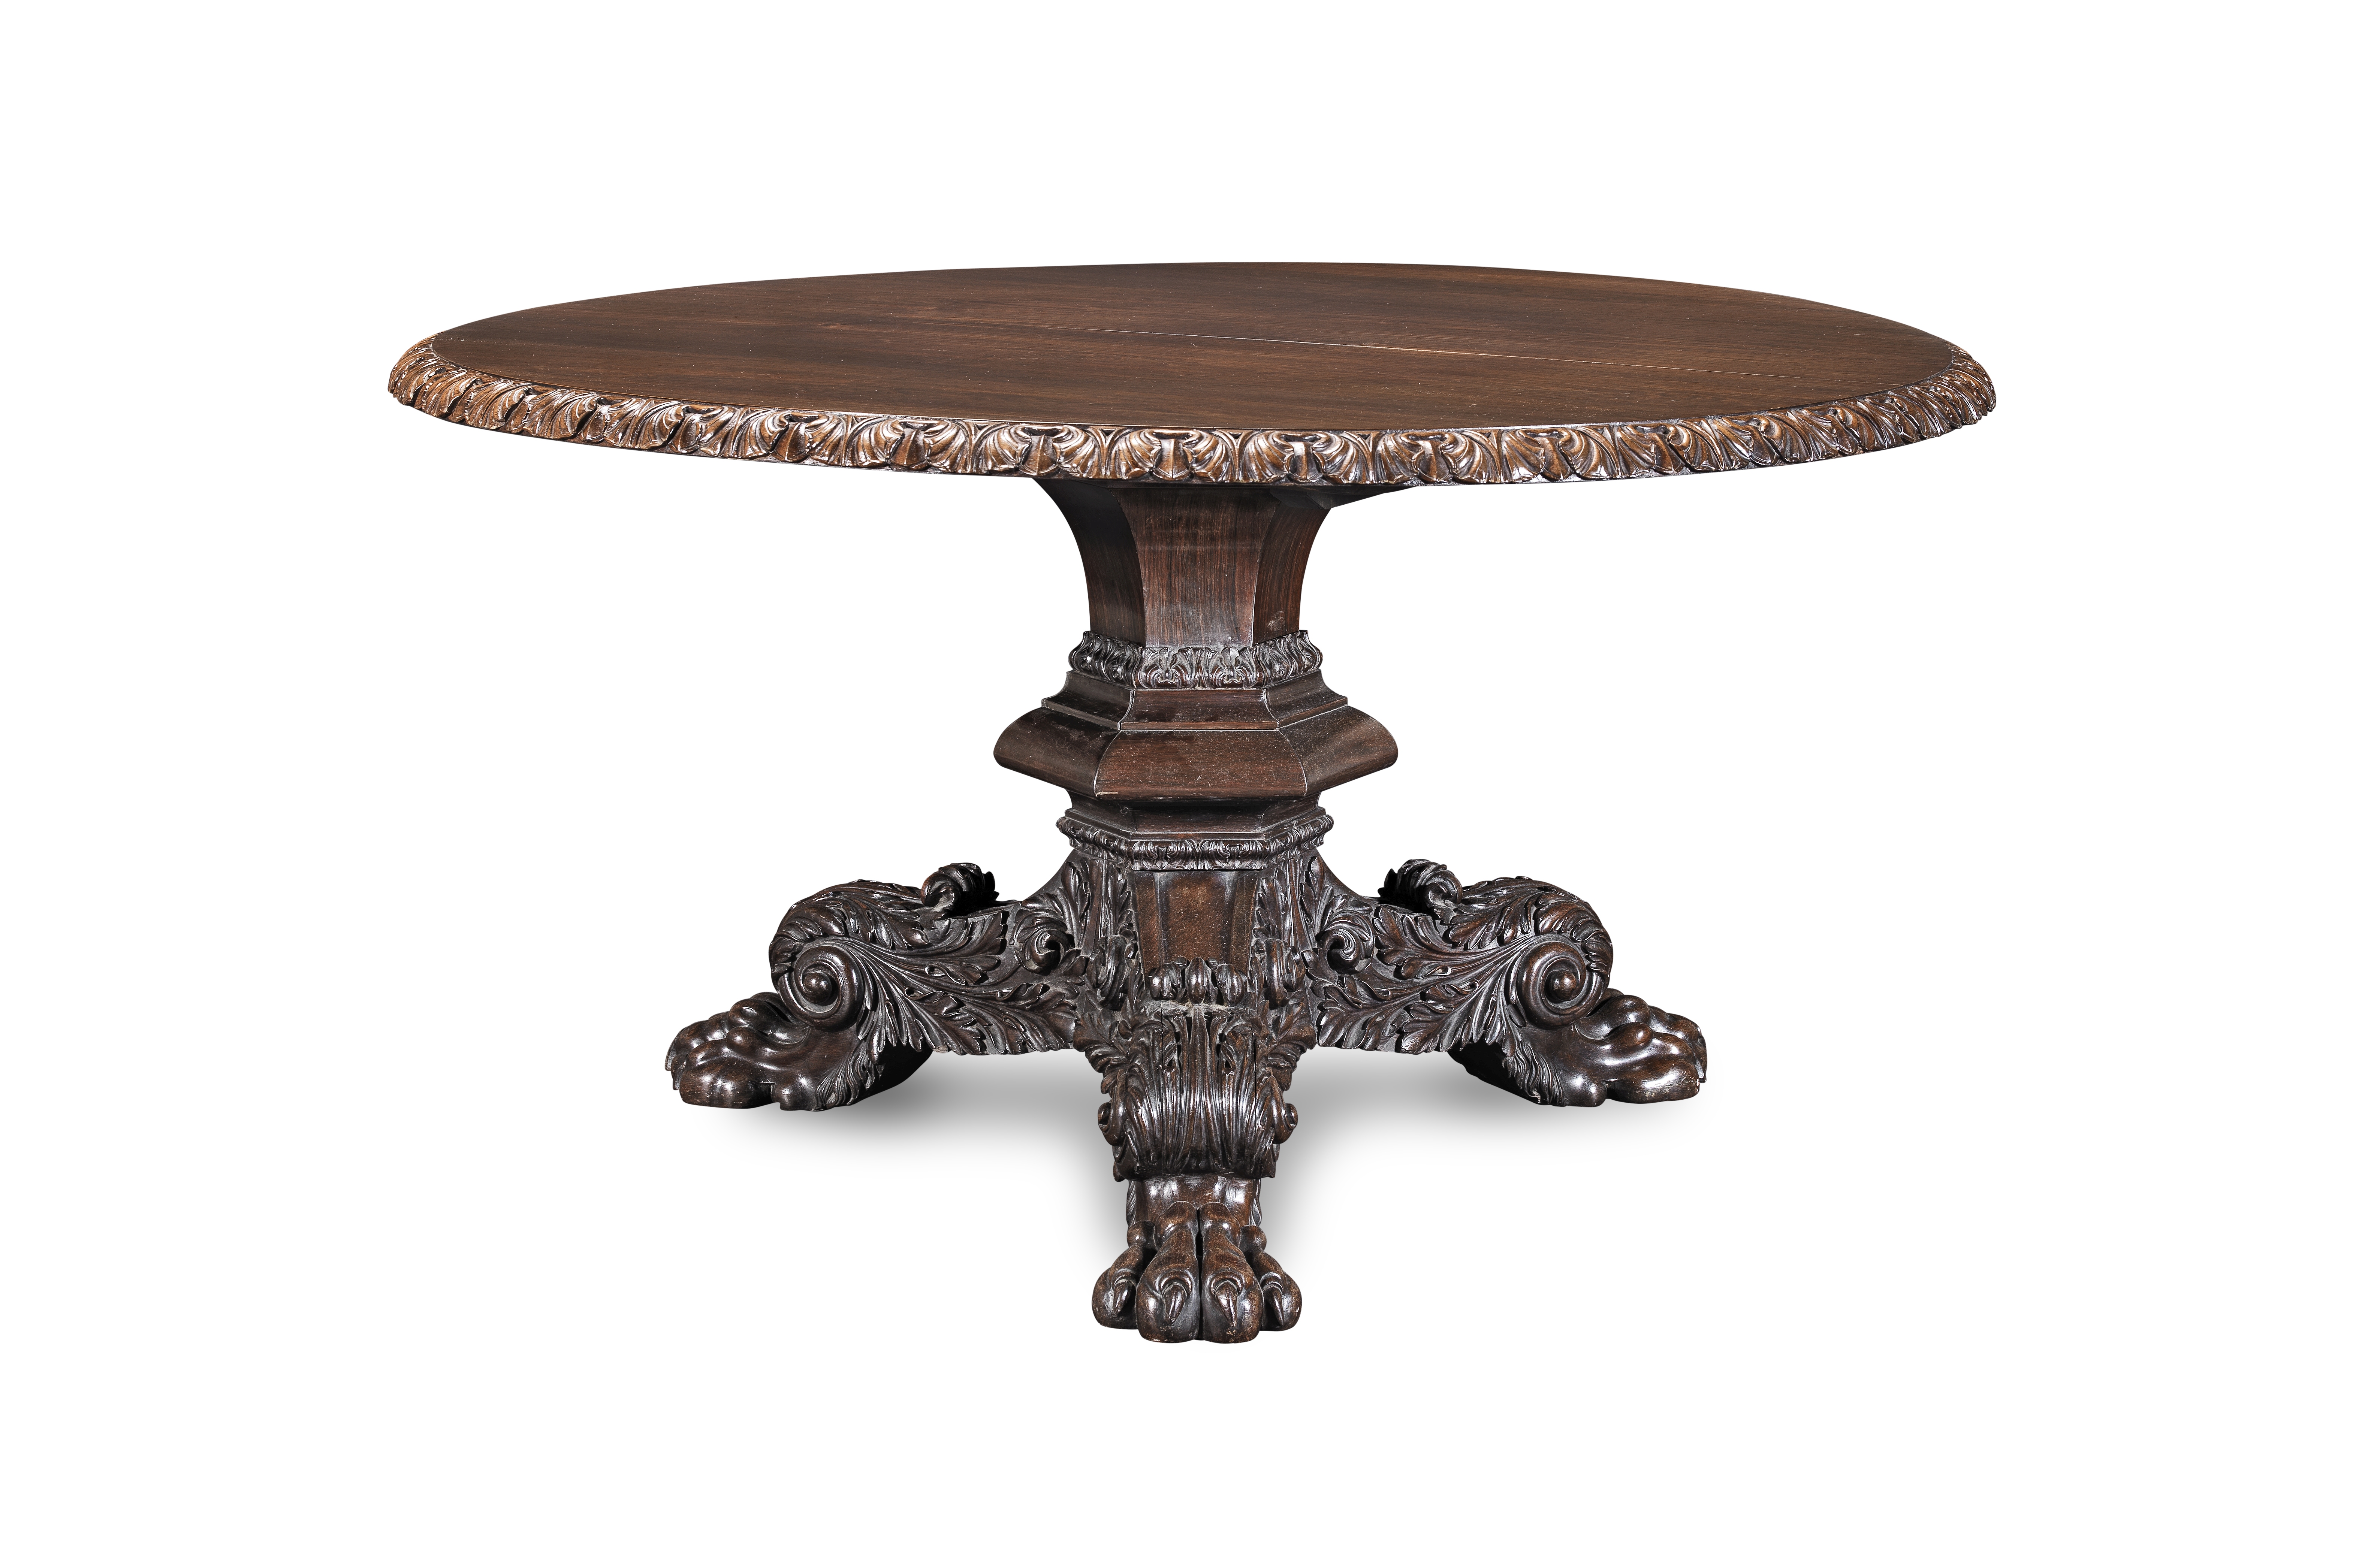 A GEORGE IV CARVED ROSEWOOD BREAKFAST OR CENTRE TABLE, ATTRIBUTED TO GILLOWS1825-1830